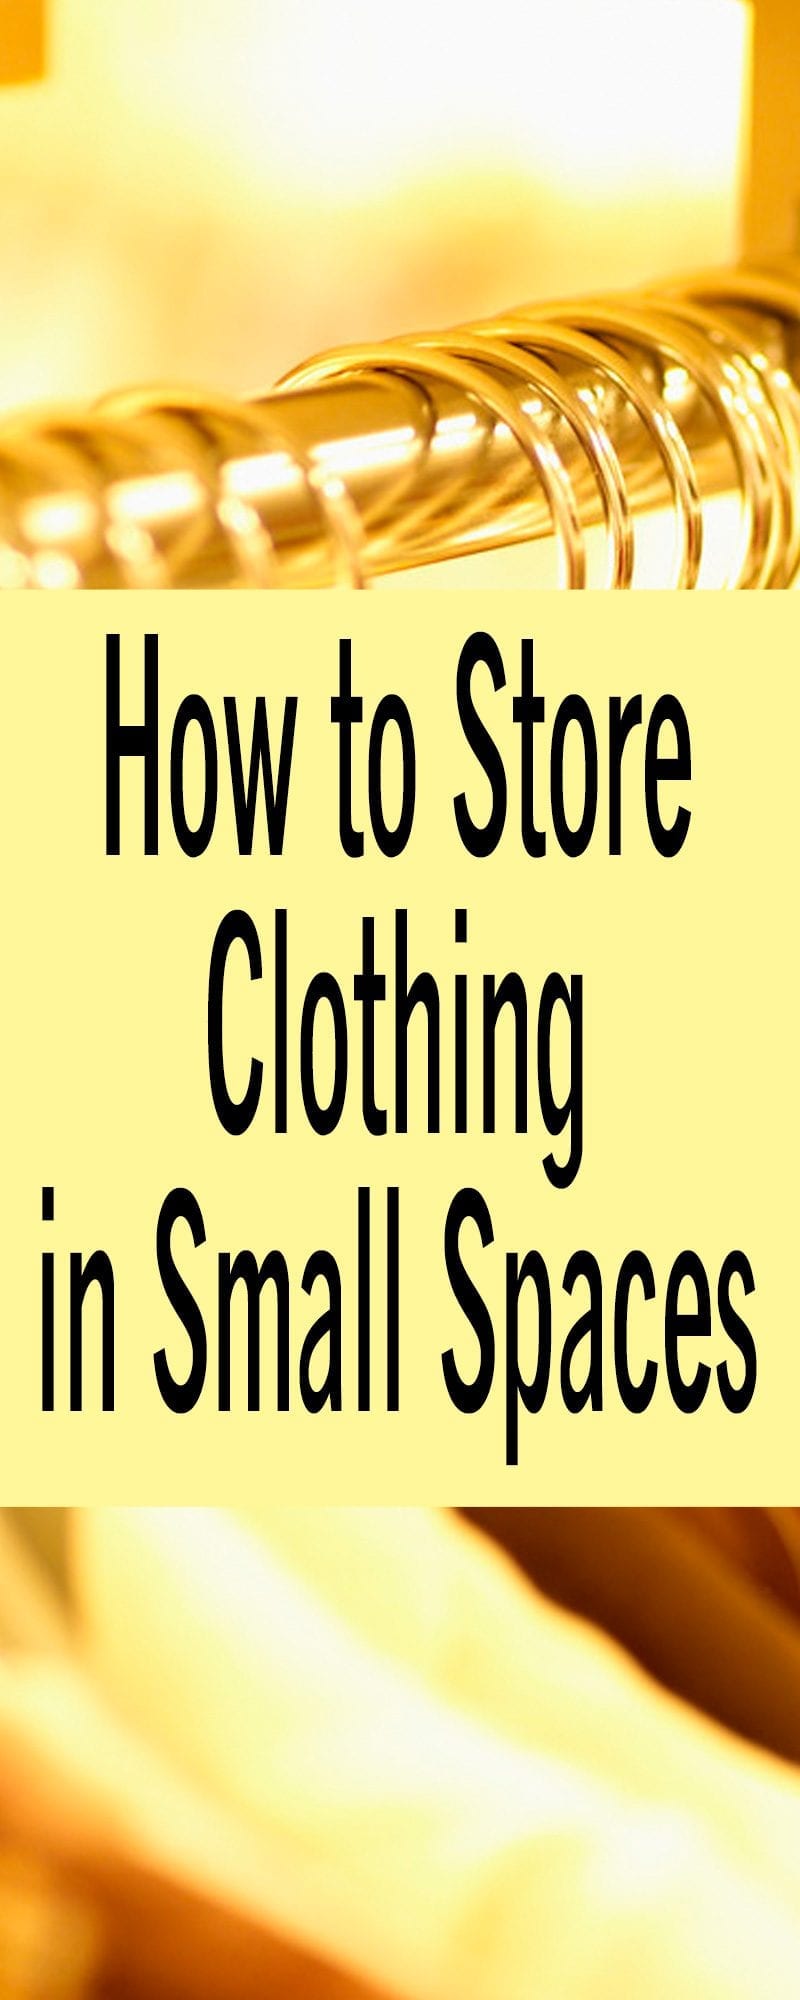 How To Store Clothing In Small Spaces